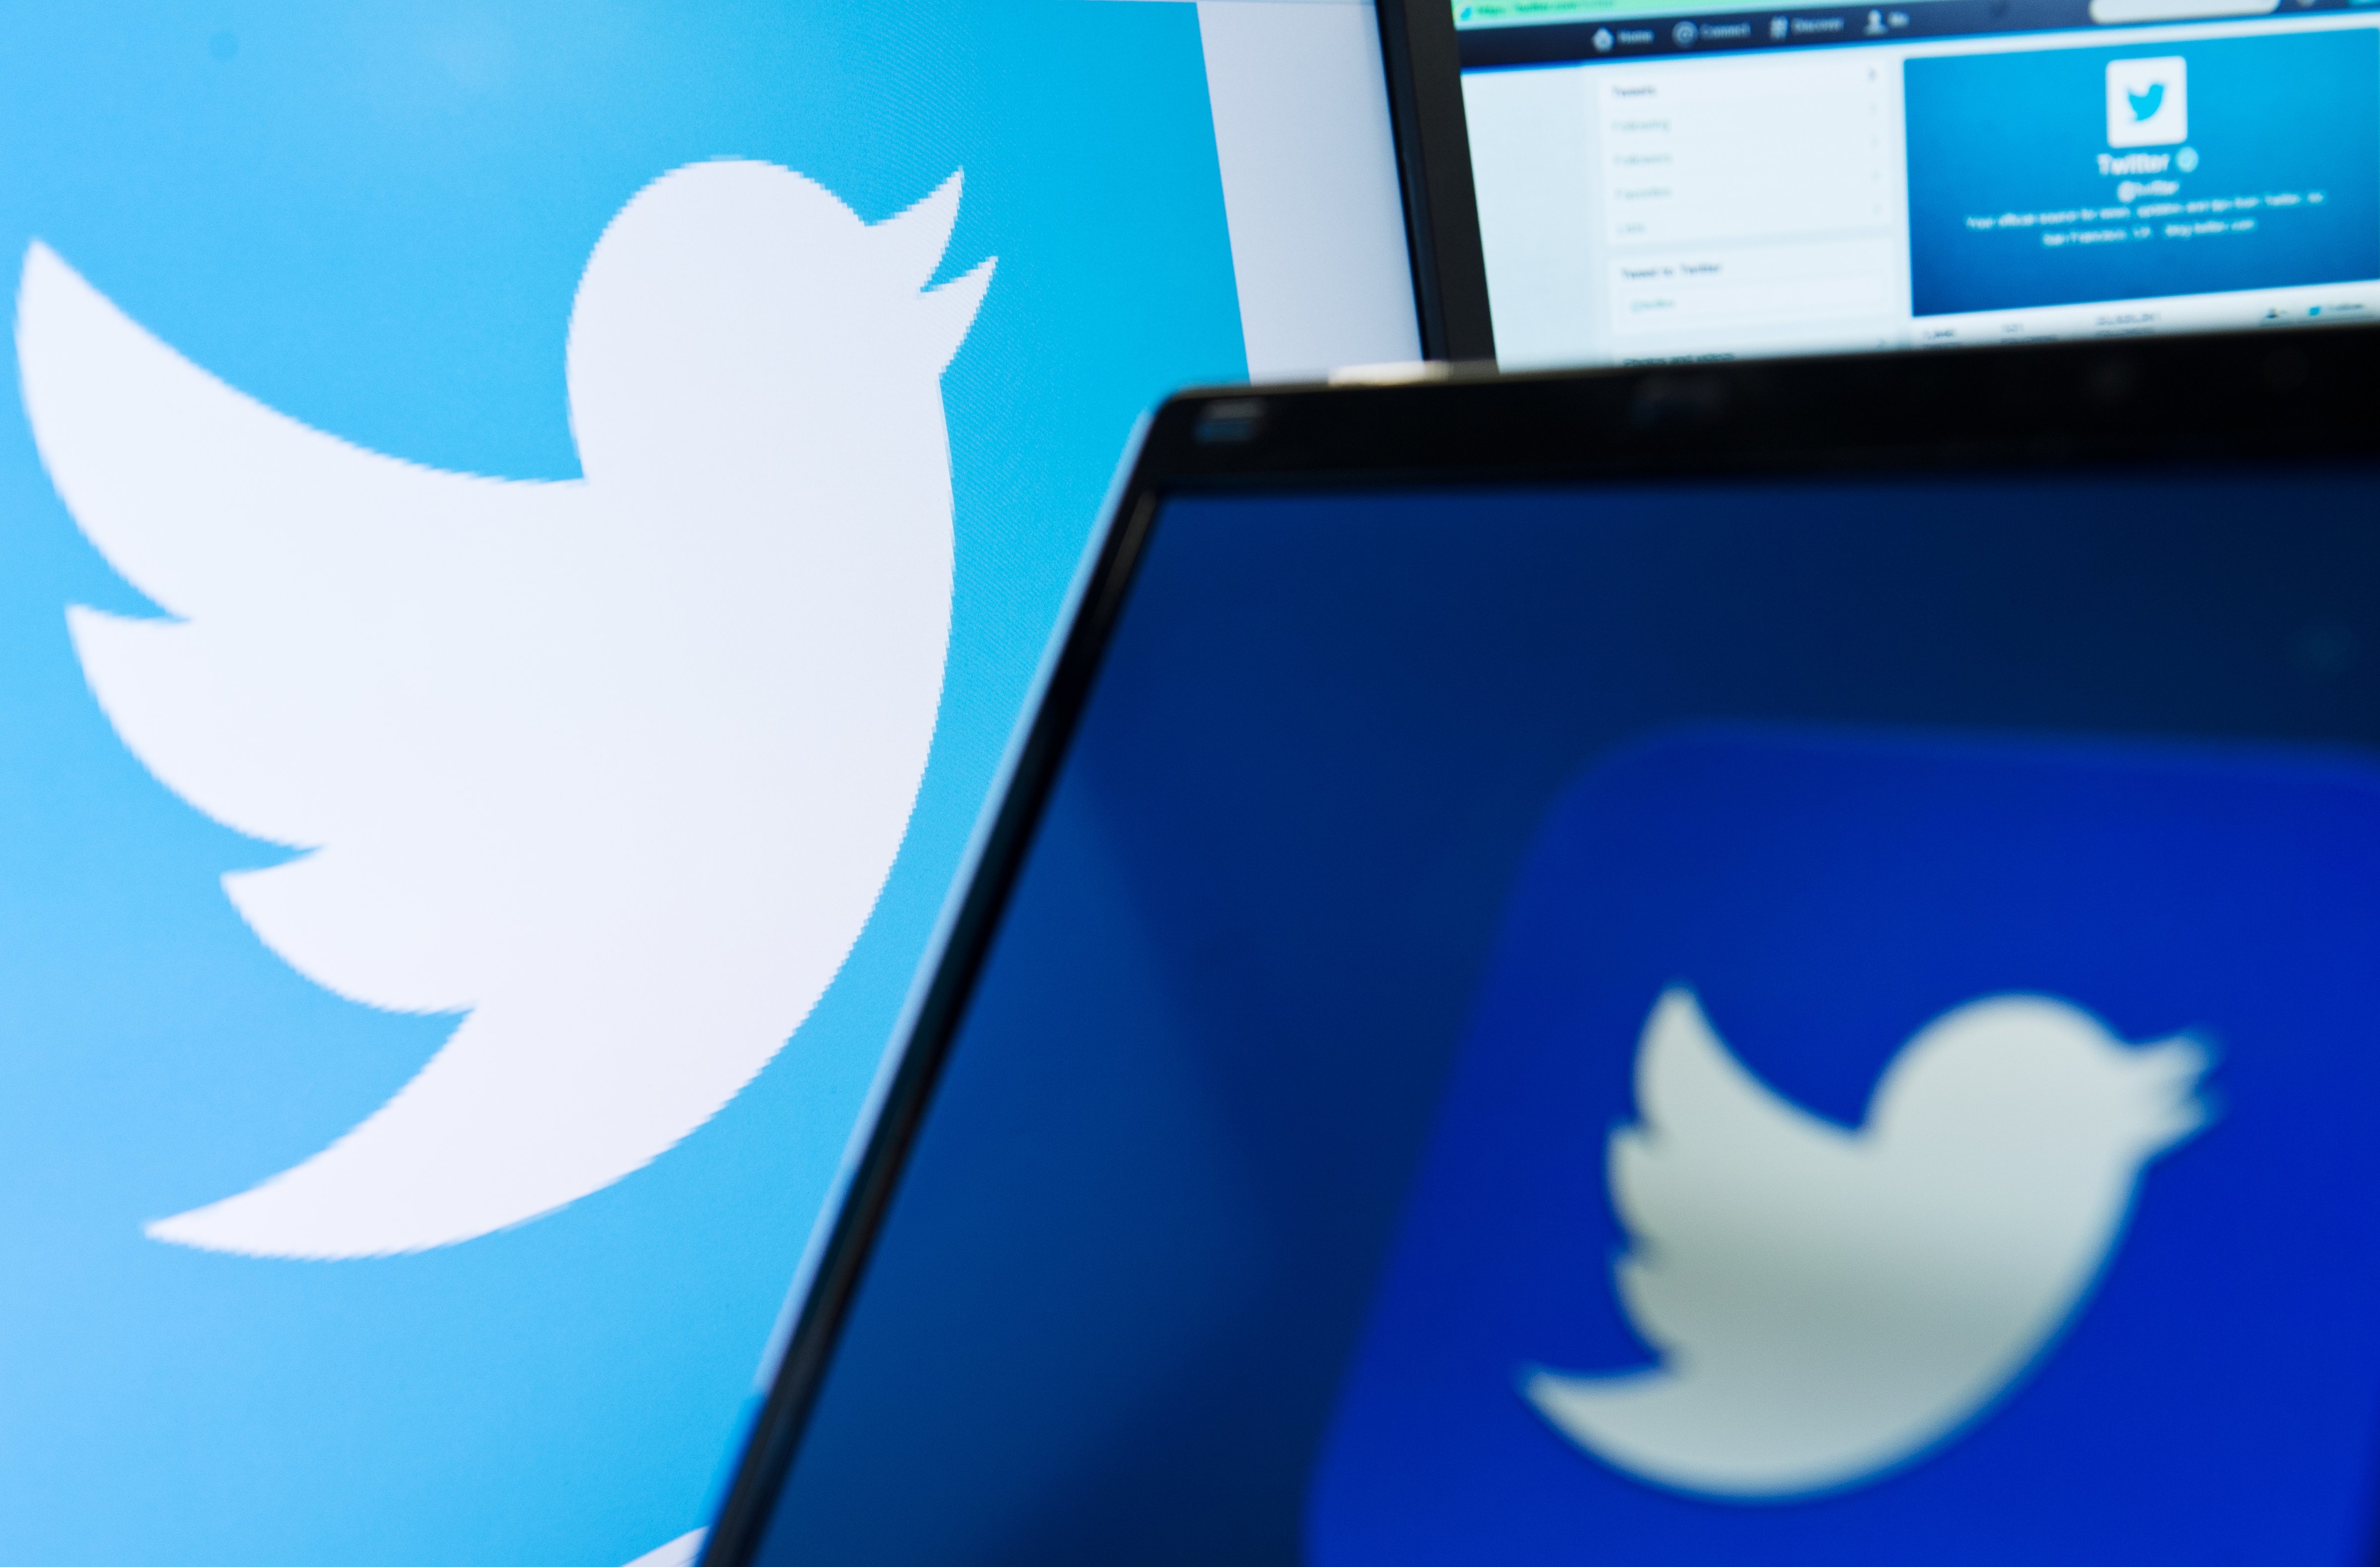 The logo of social networking website 'Twitter' is displayed on a computer screen (LEON NEAL&mdash;AFP/Getty Images)